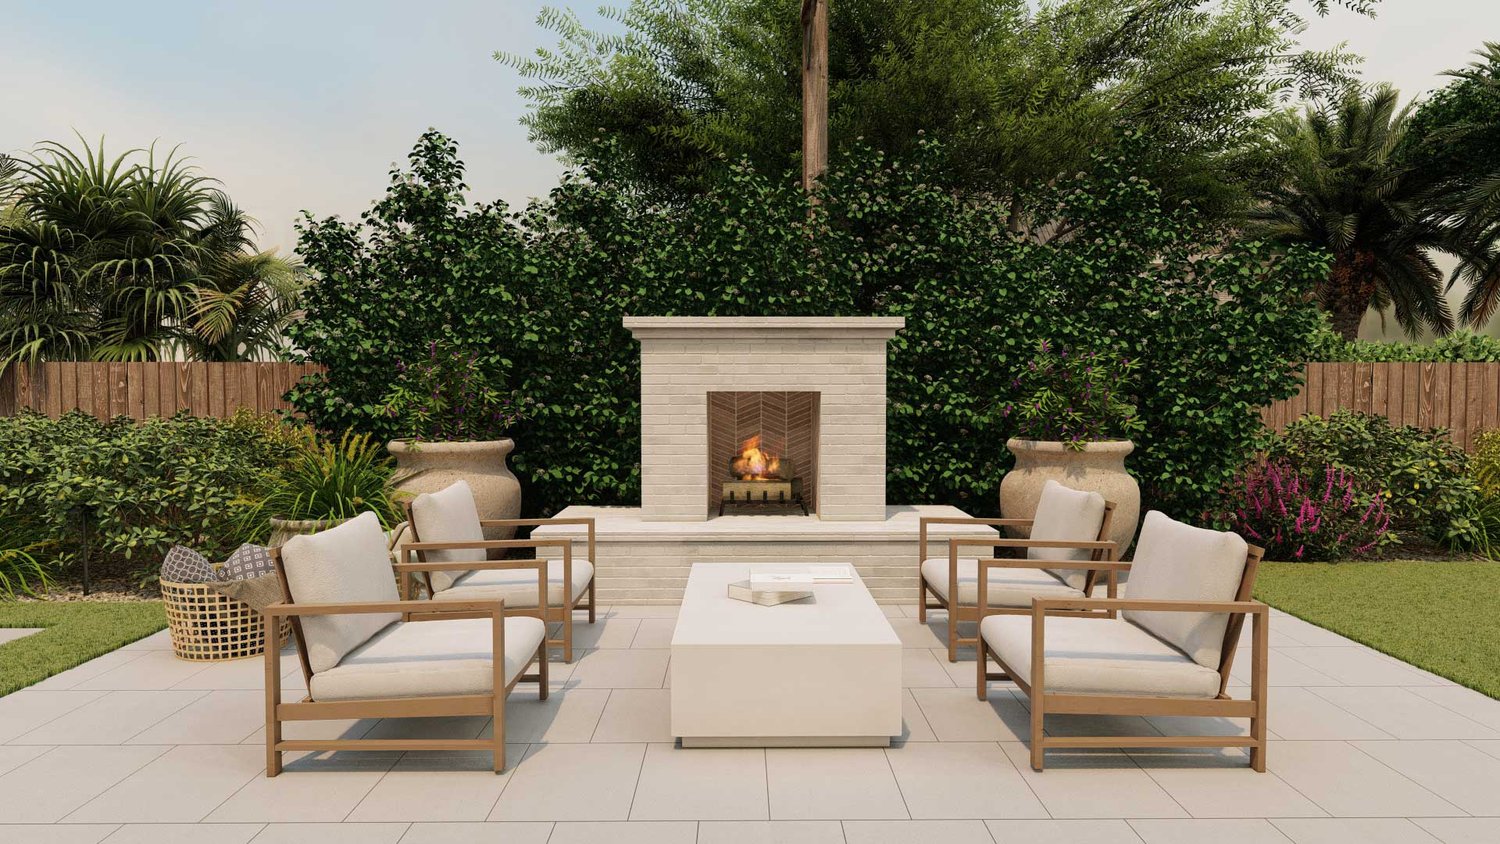 Tampa outdoor paver patio fire pit seating area